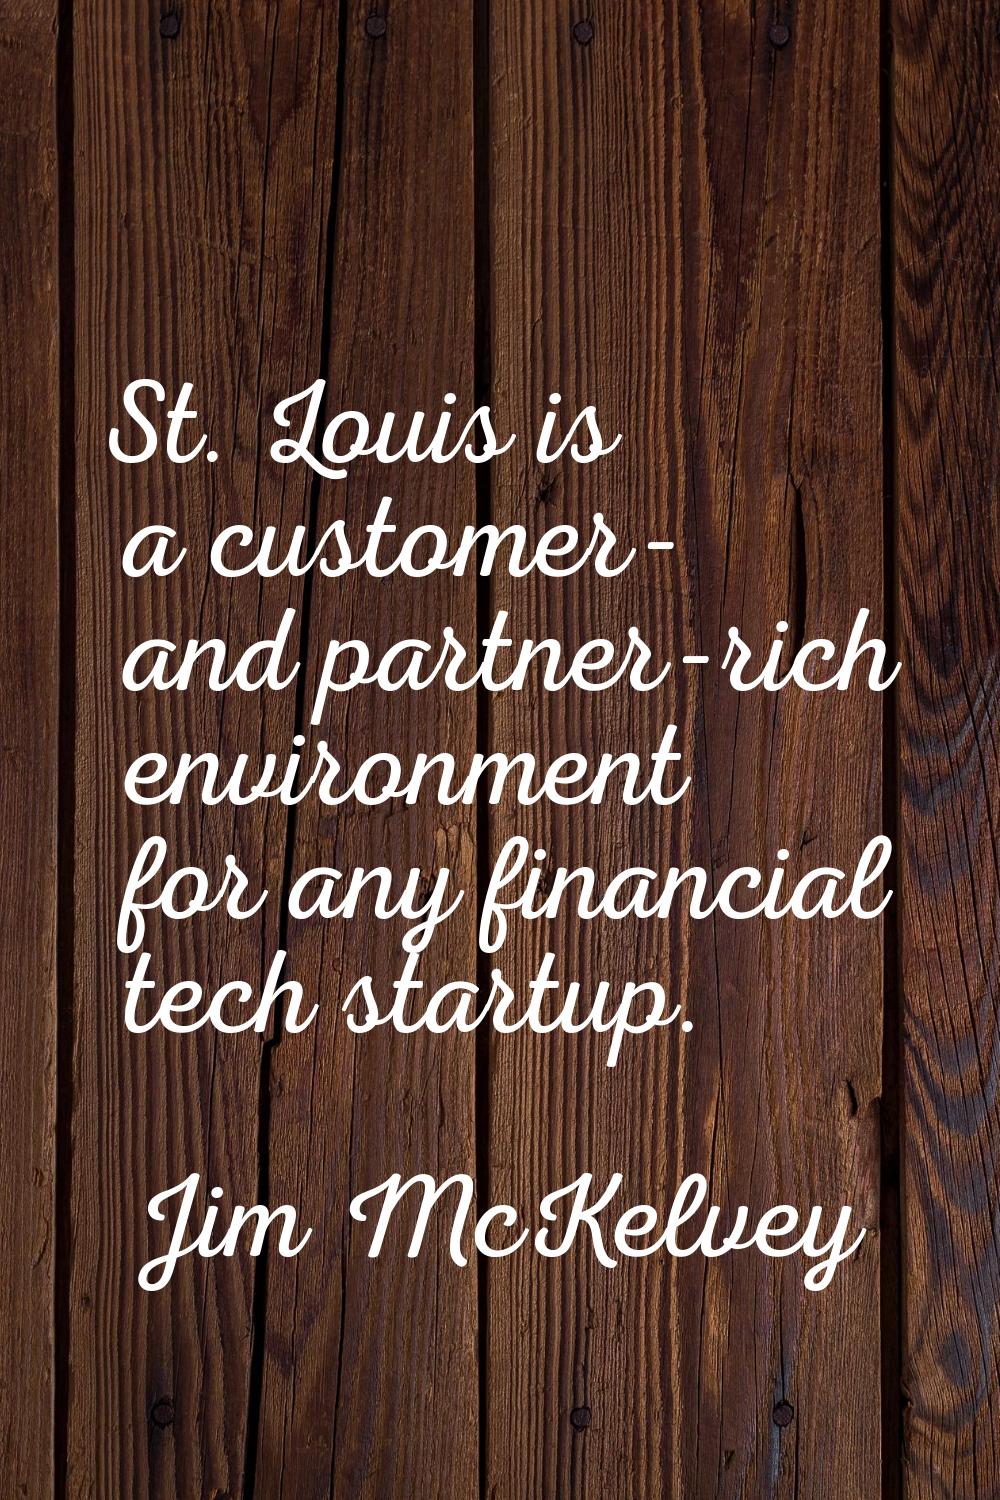 St. Louis is a customer- and partner-rich environment for any financial tech startup.